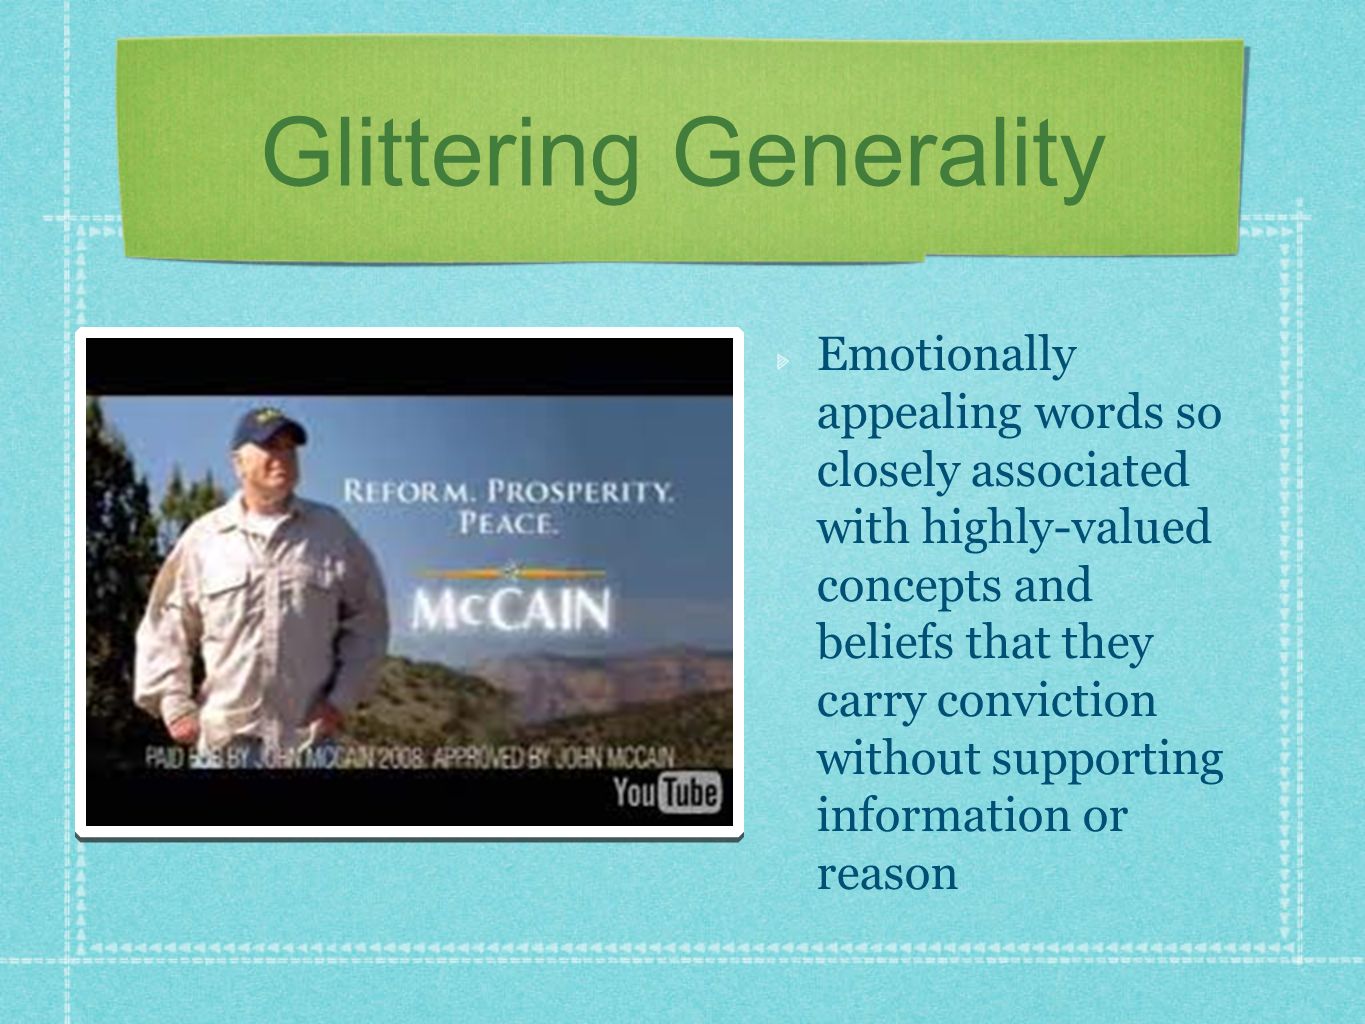 Glittering Generality Emotionally appealing words so closely associated with highly-valued concepts and beliefs that they carry conviction without supporting information or reason